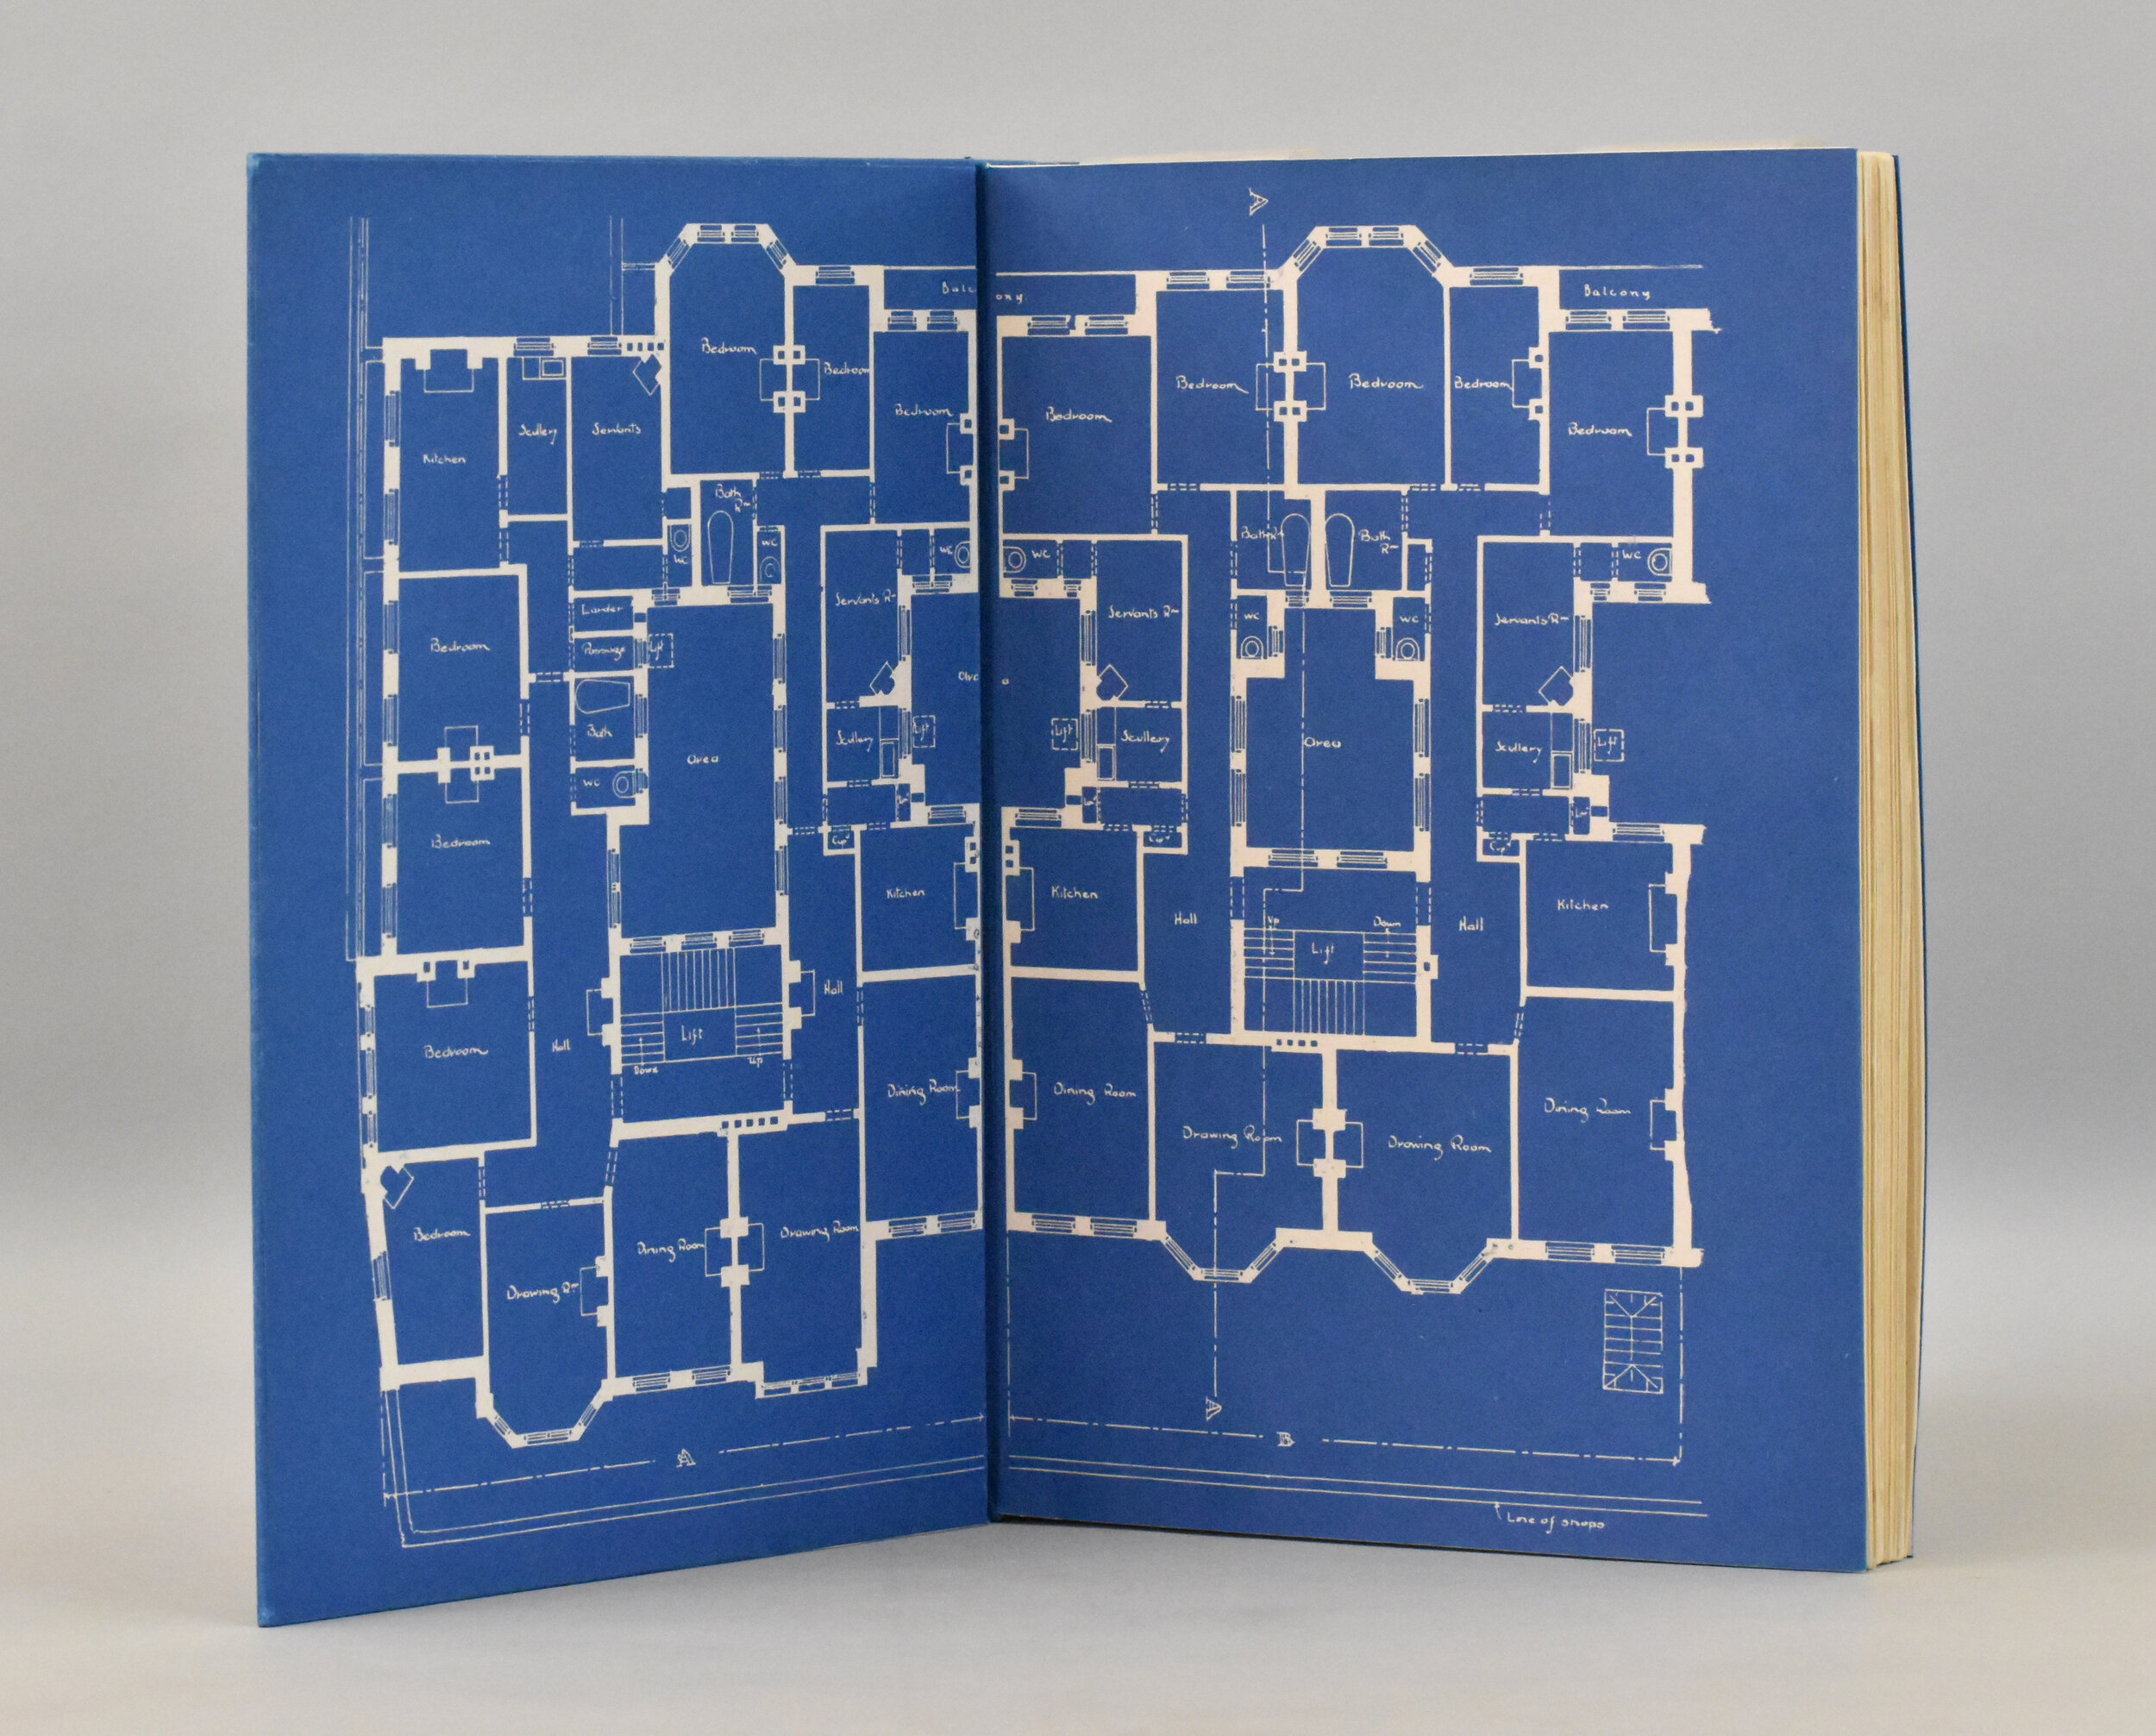 Karen Hanmer - Flats, Urban Houses and Cottage Homes; a companion volume to "The British home of to-day"